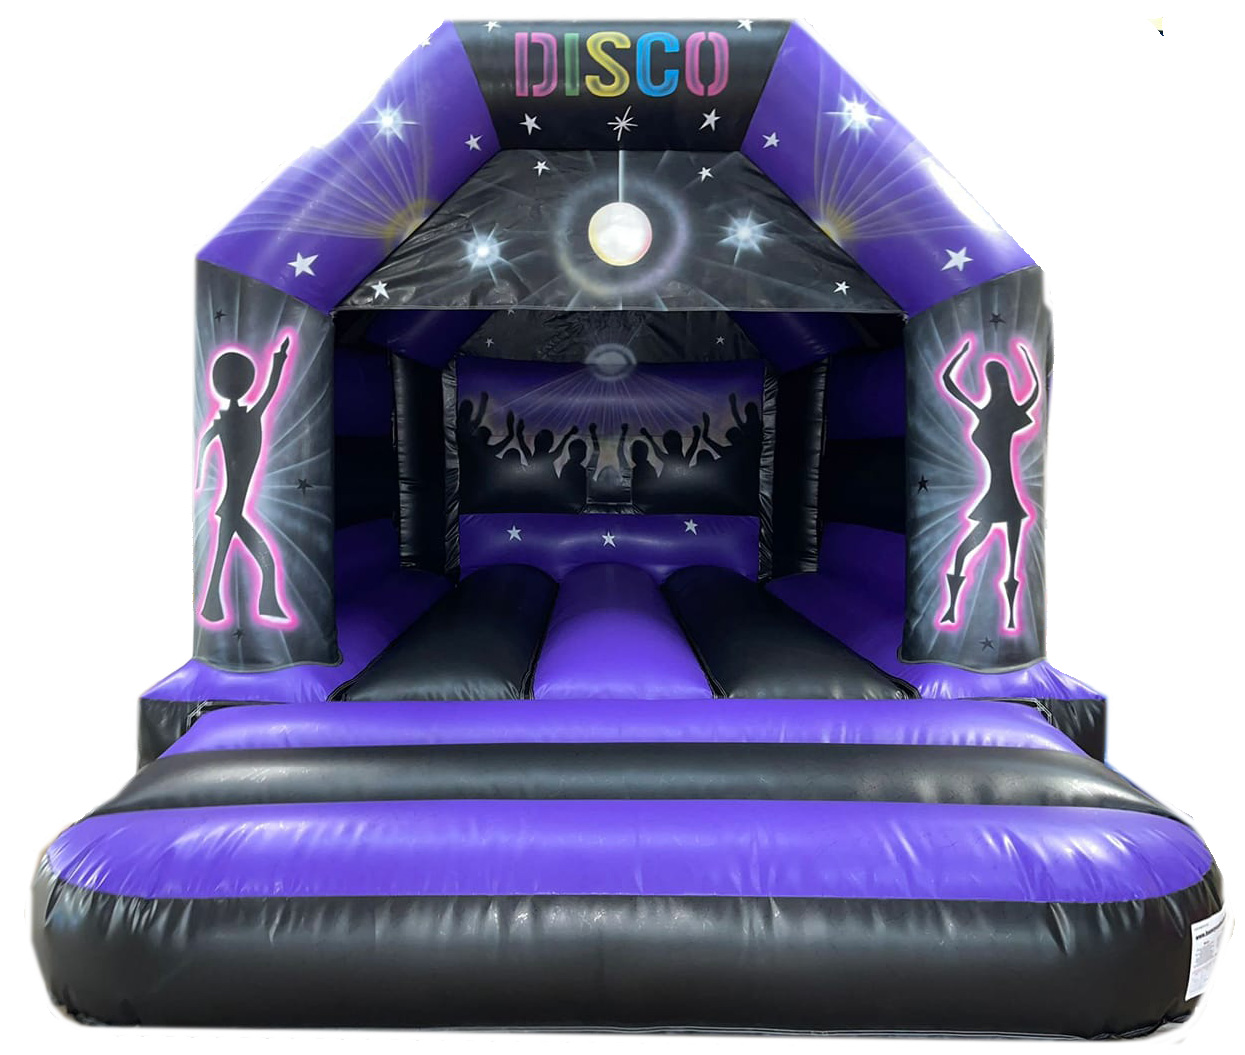 Bouncy Castle Sales - BC613 - Bouncy Inflatable for sale